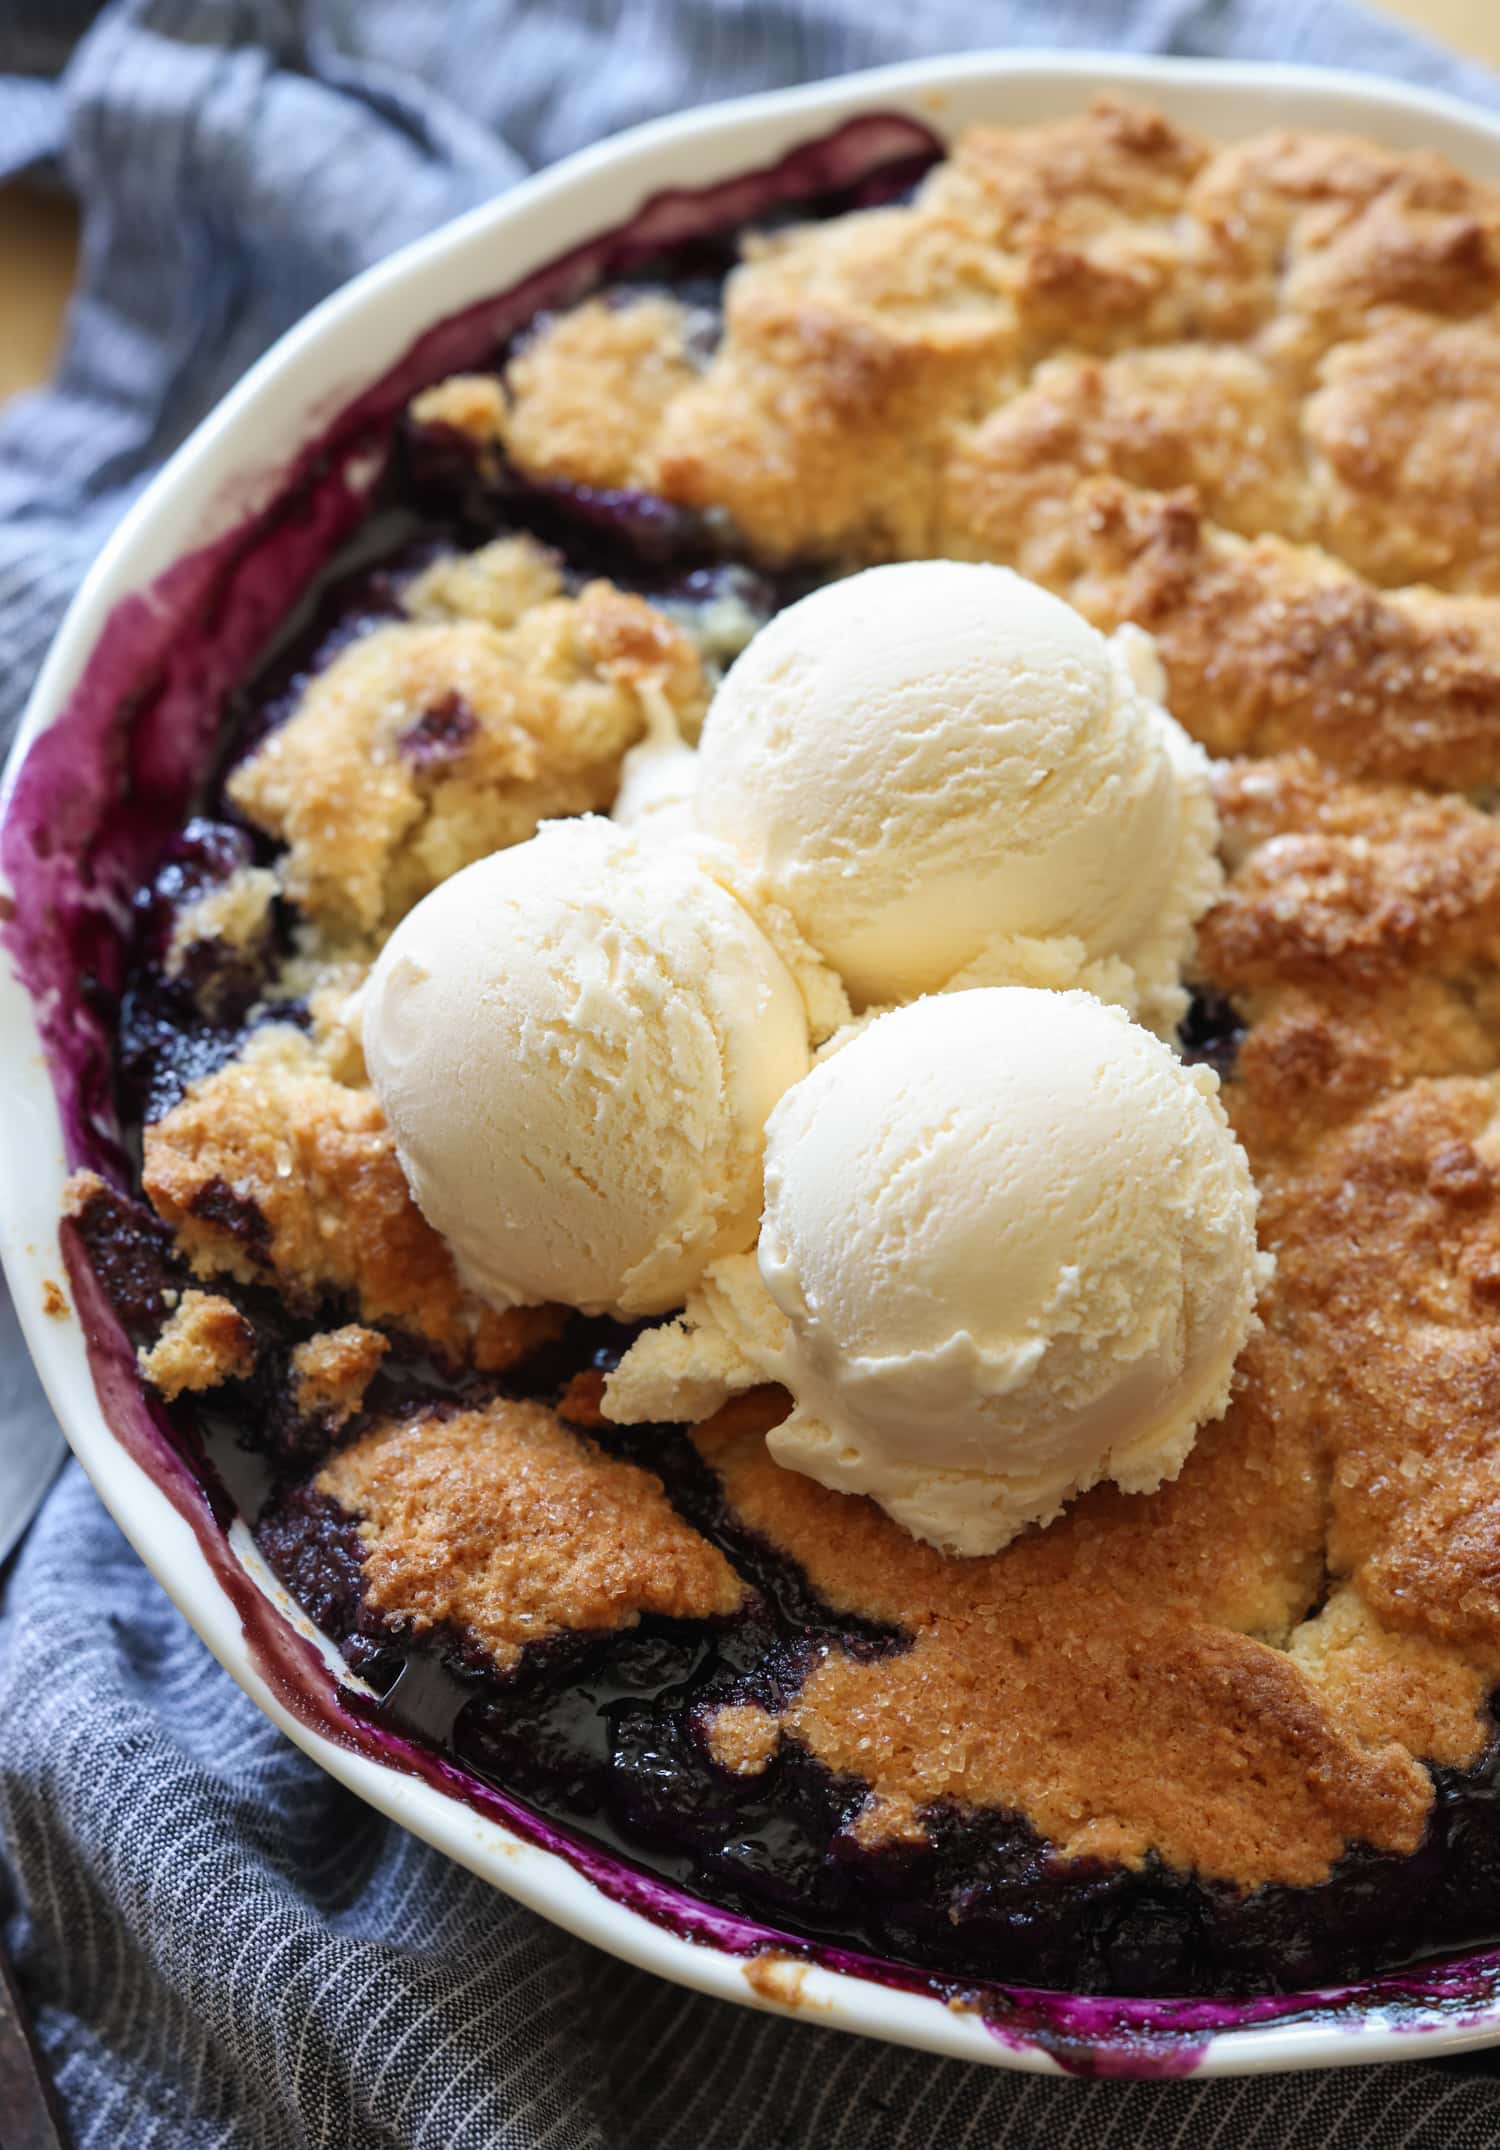 Blueberry cobbler in a pie plate with 3 scoops of vanilla ice cream on top